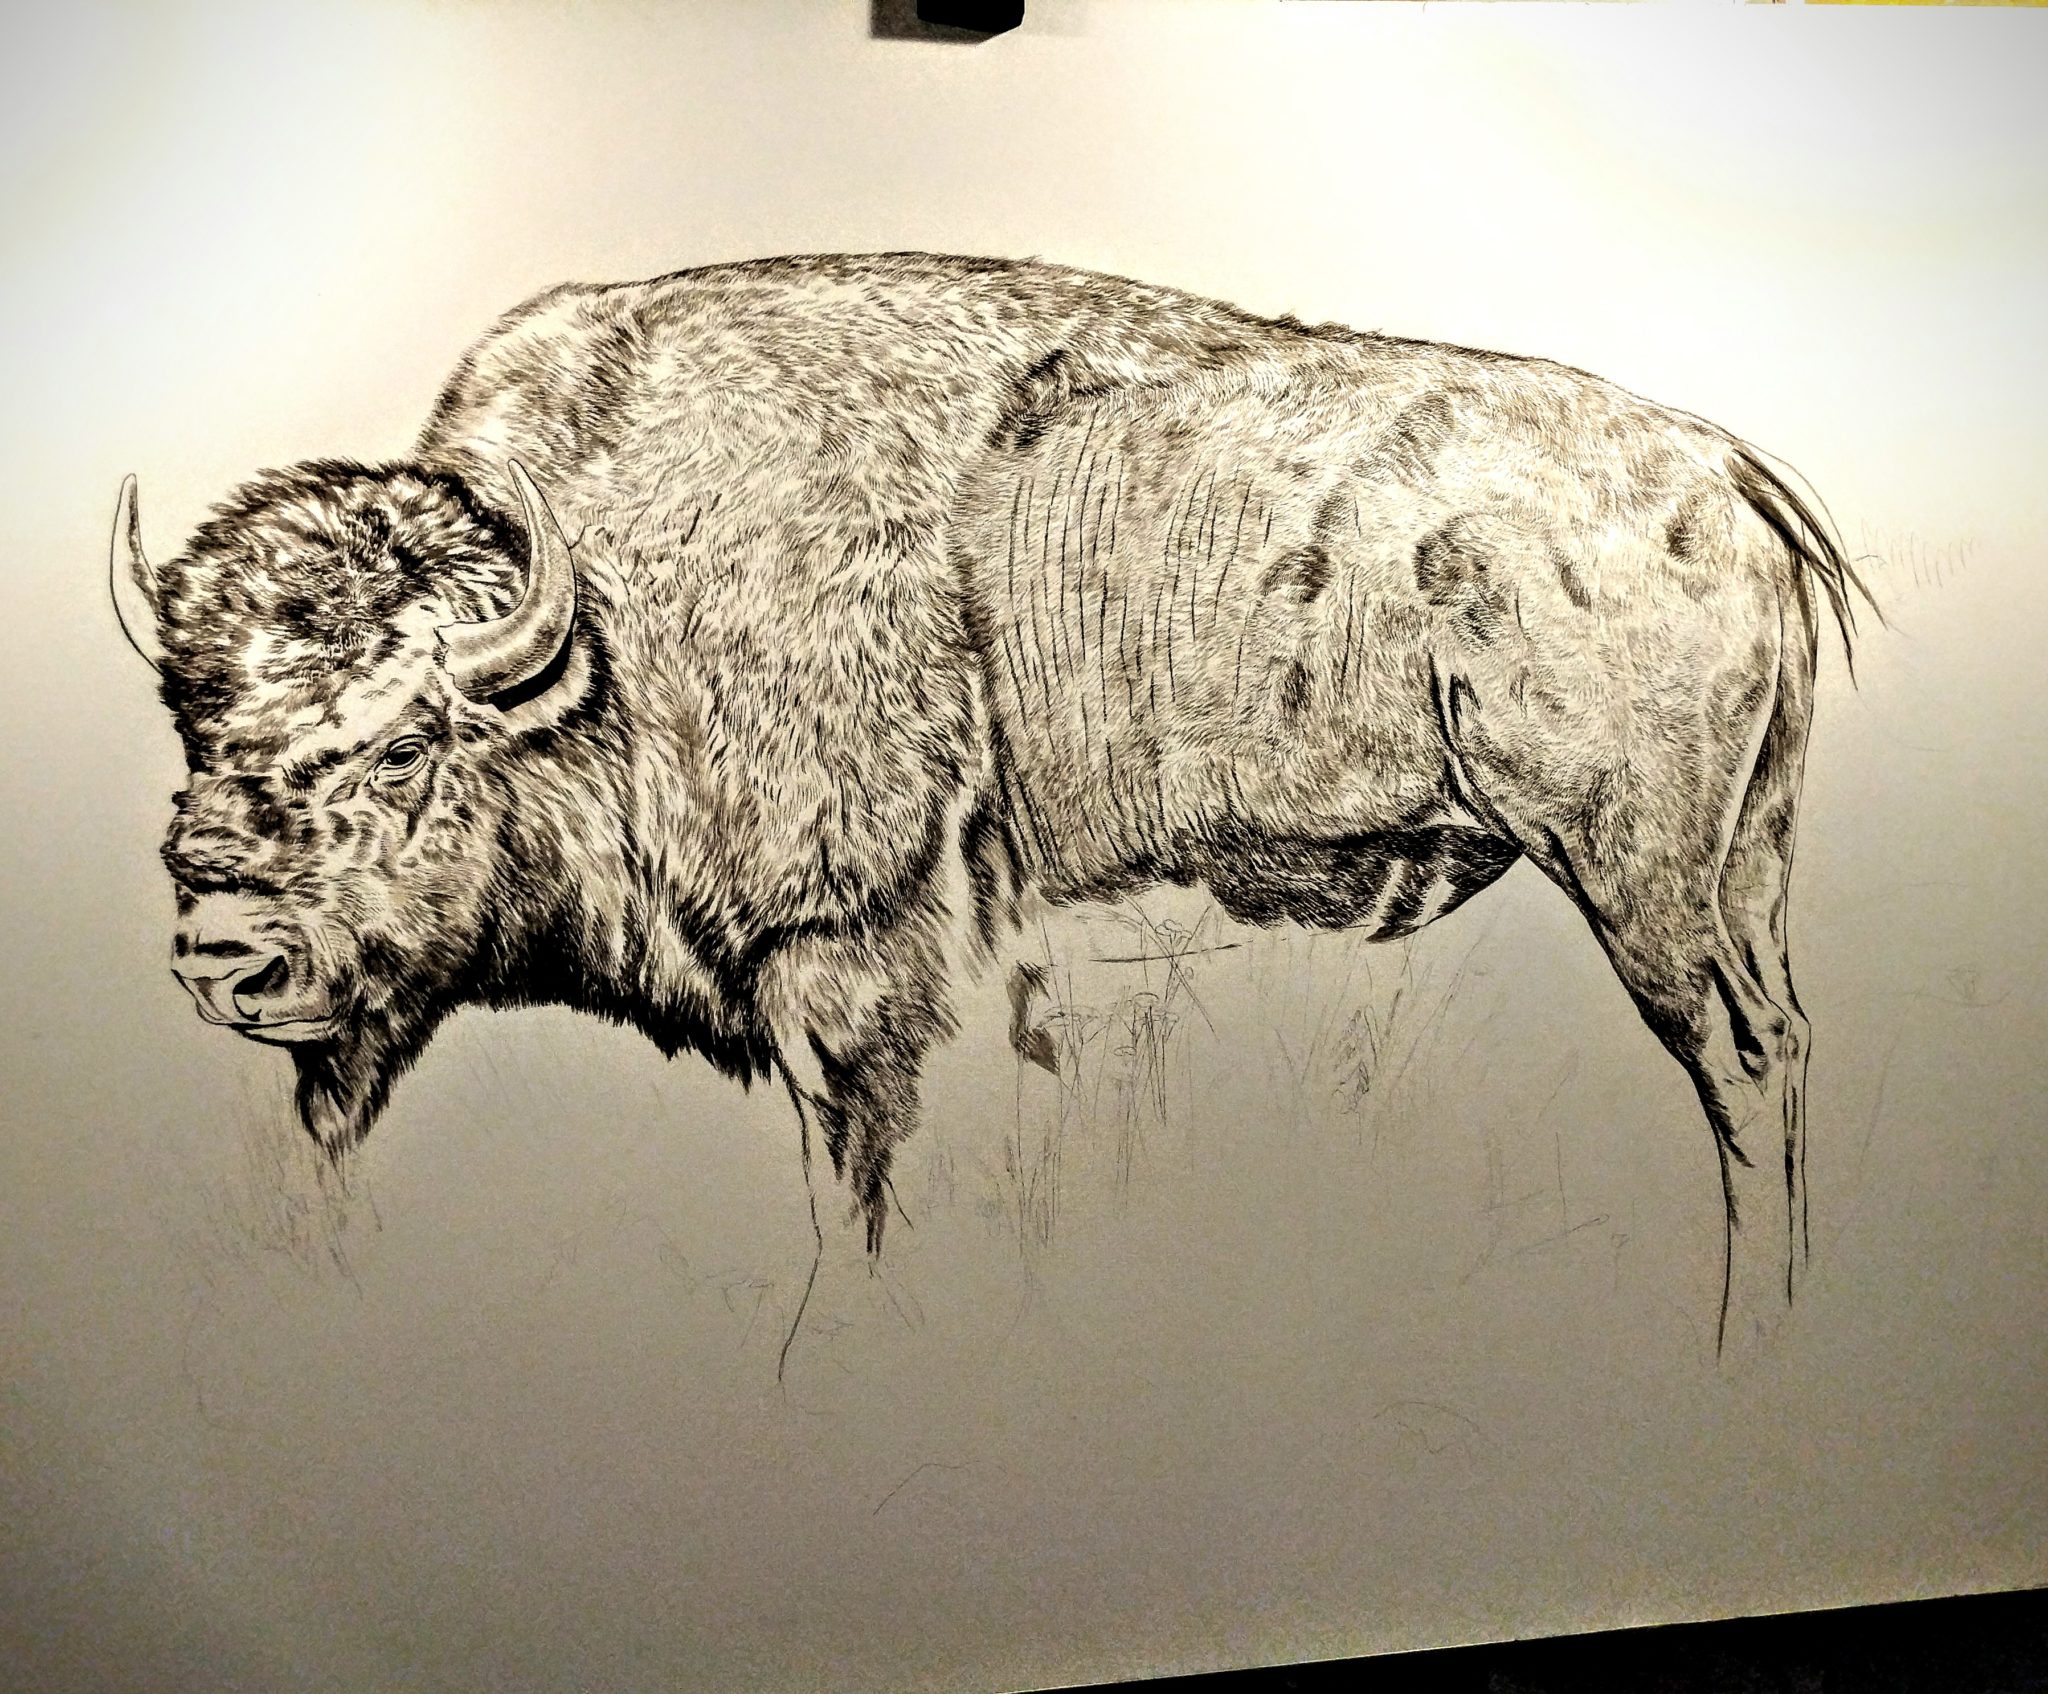 Bull Bison (Presently Untitled) in progress, 36x24in, watercolor on board